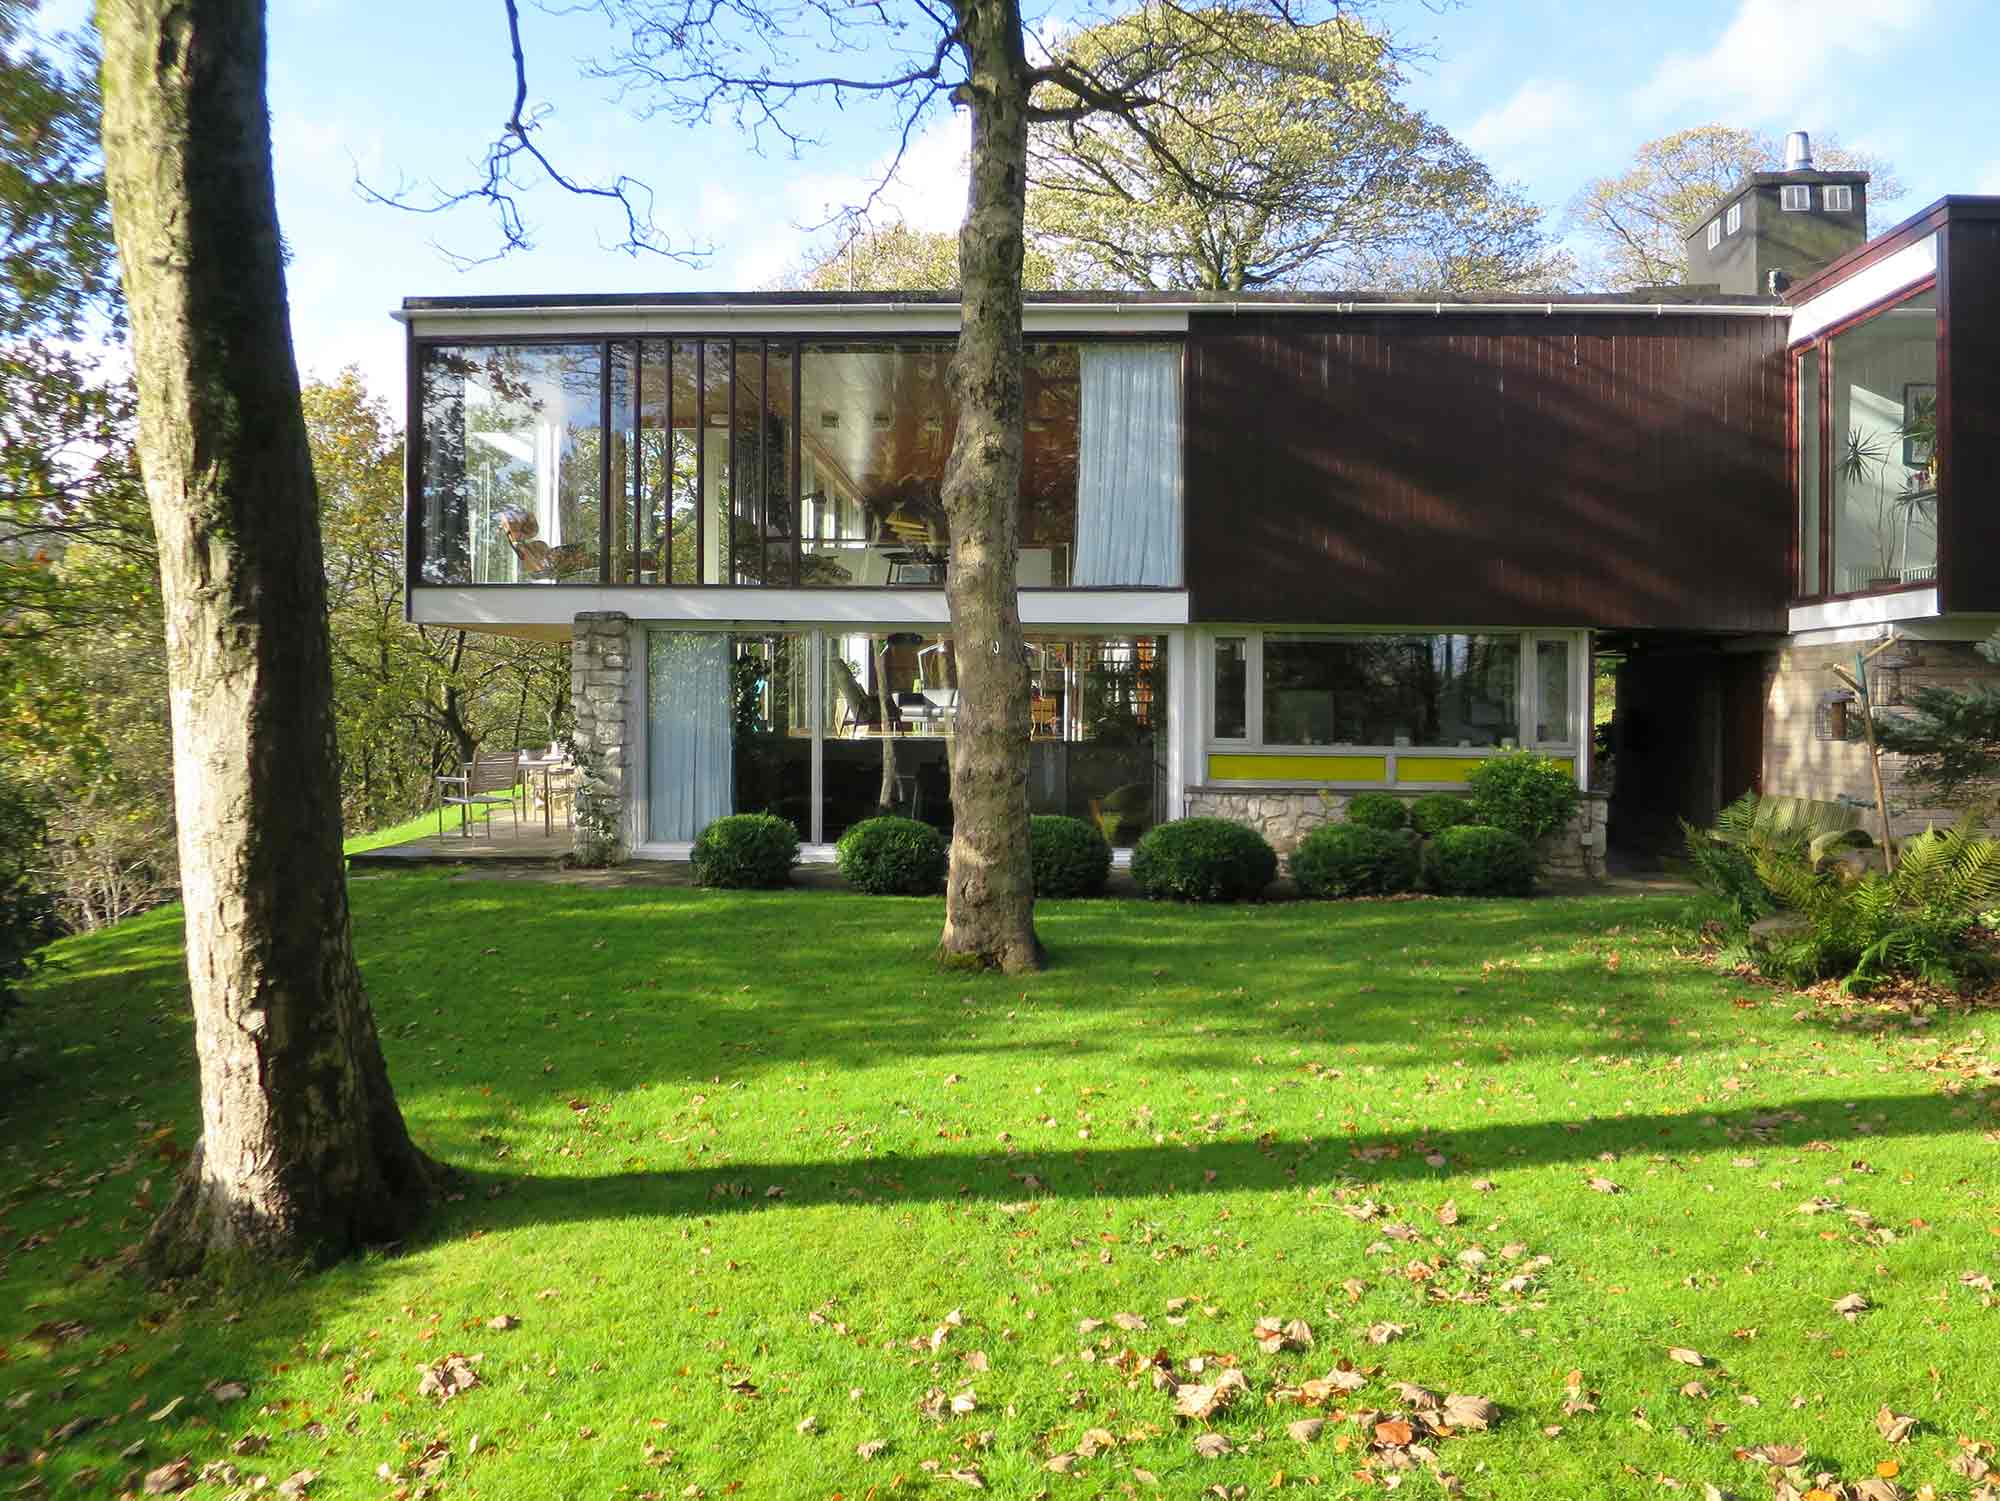 Flat-roofed modern house with top floor overhanging the lower floor surrounded by large trees